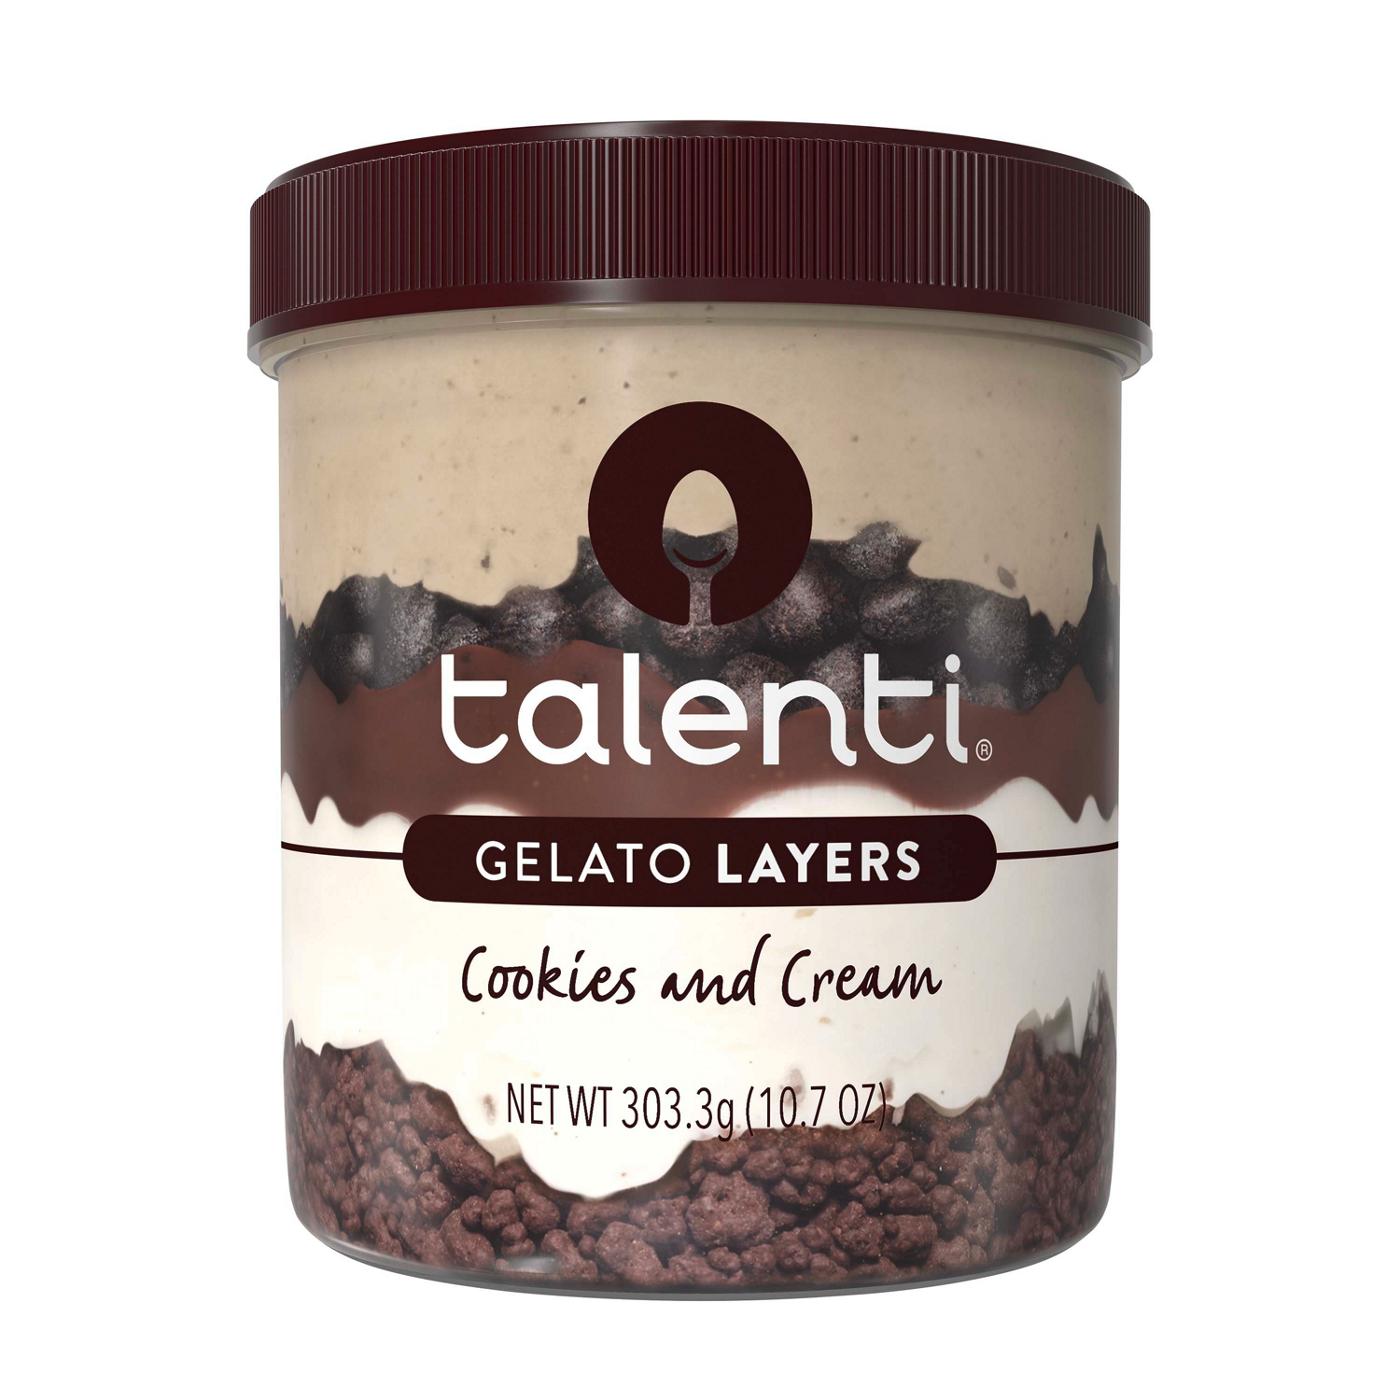 Talenti Gelato Layers Cookies and Cream; image 1 of 3